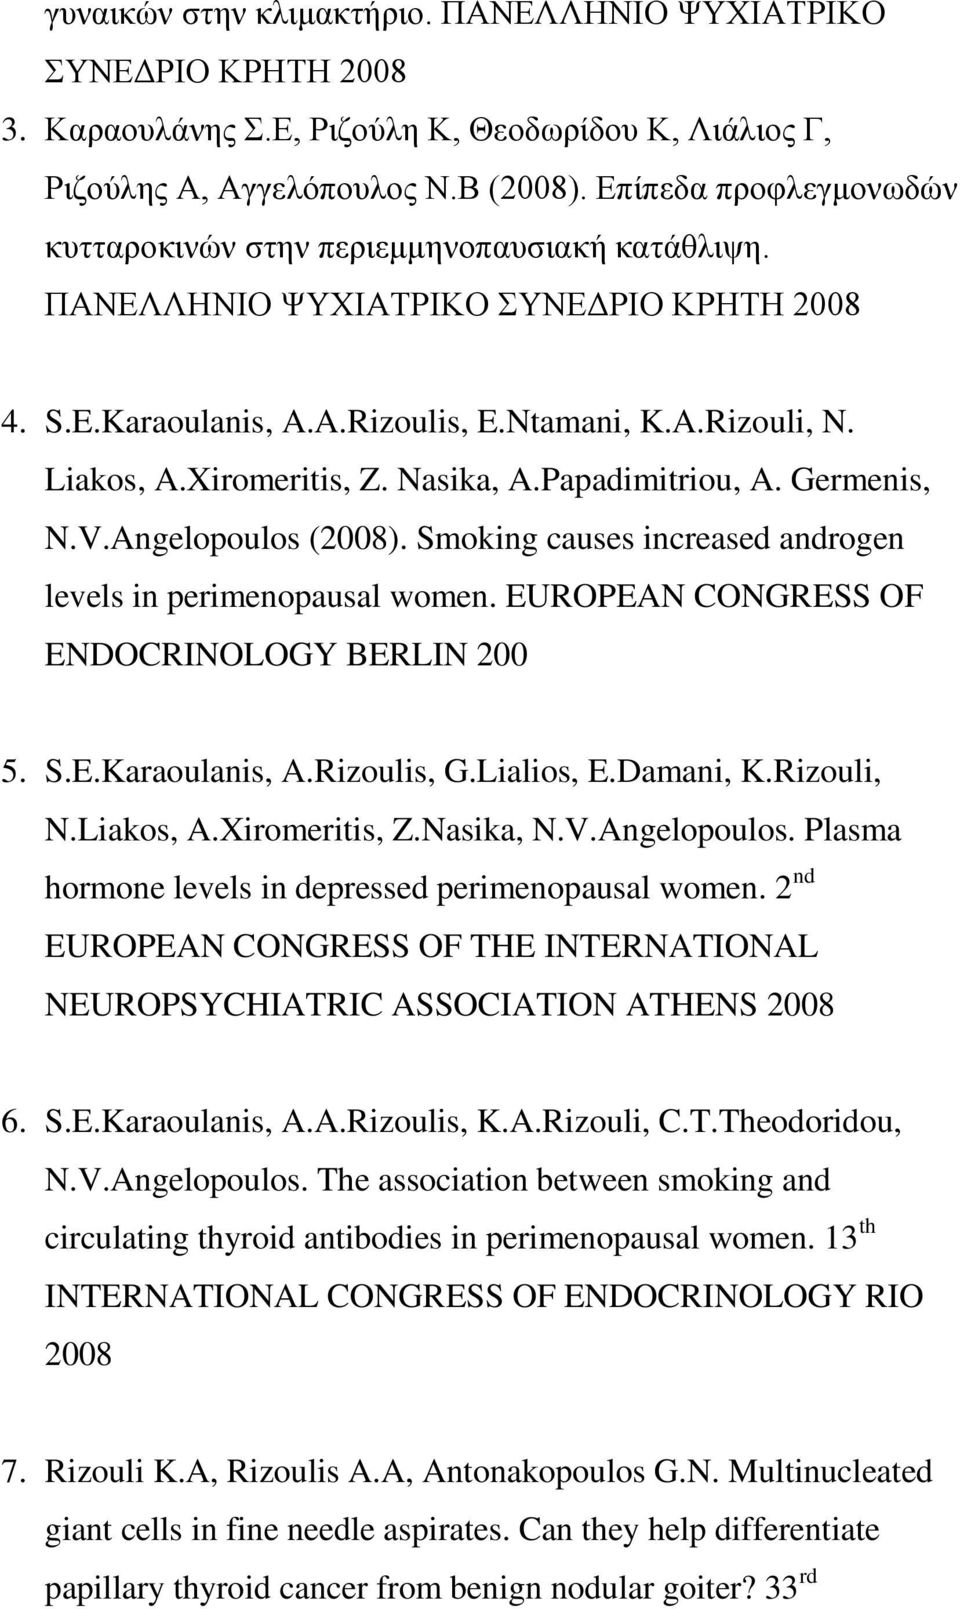 Nasika, A.Papadimitriou, A. Germenis, N.V.Angelopoulos (2008). Smoking causes increased androgen levels in perimenopausal women. EUROPEAN CONGRESS OF ENDOCRINOLOGY BERLIN 200 5. S.E.Karaoulanis, A.